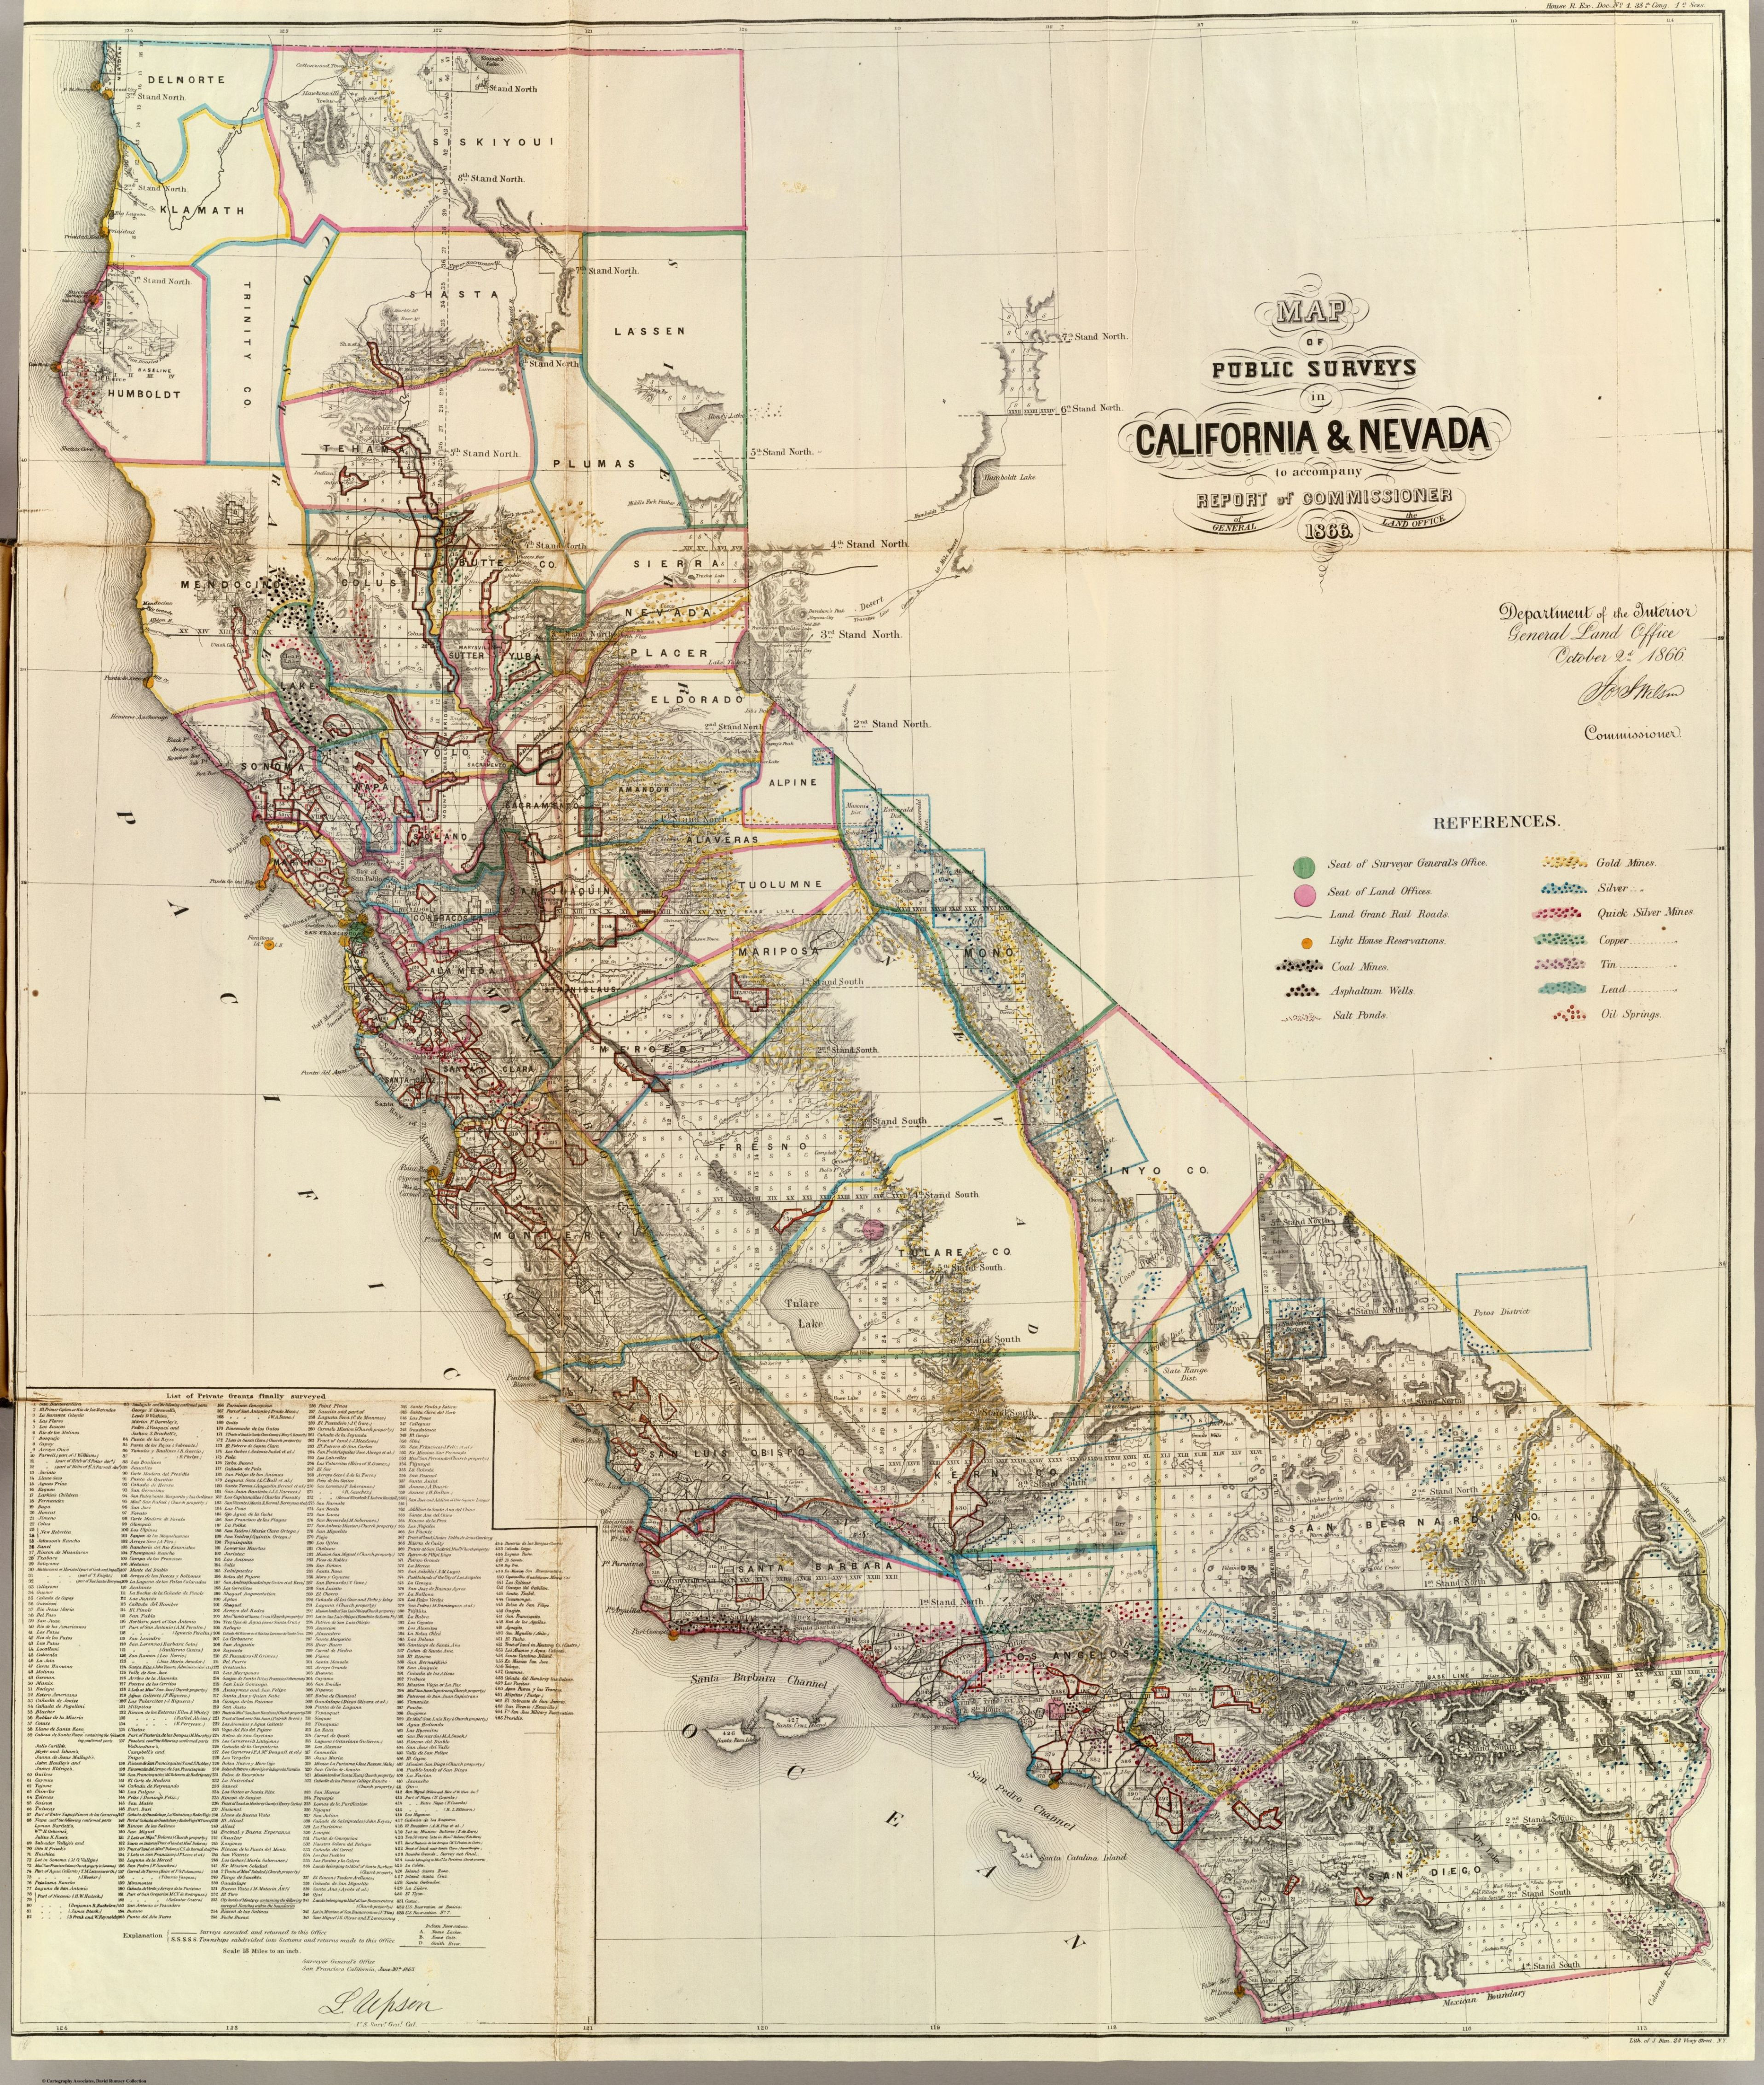 Freeway Map Southern California Outline Historic Maps - Ettcarworld - Old Maps Of Southern California